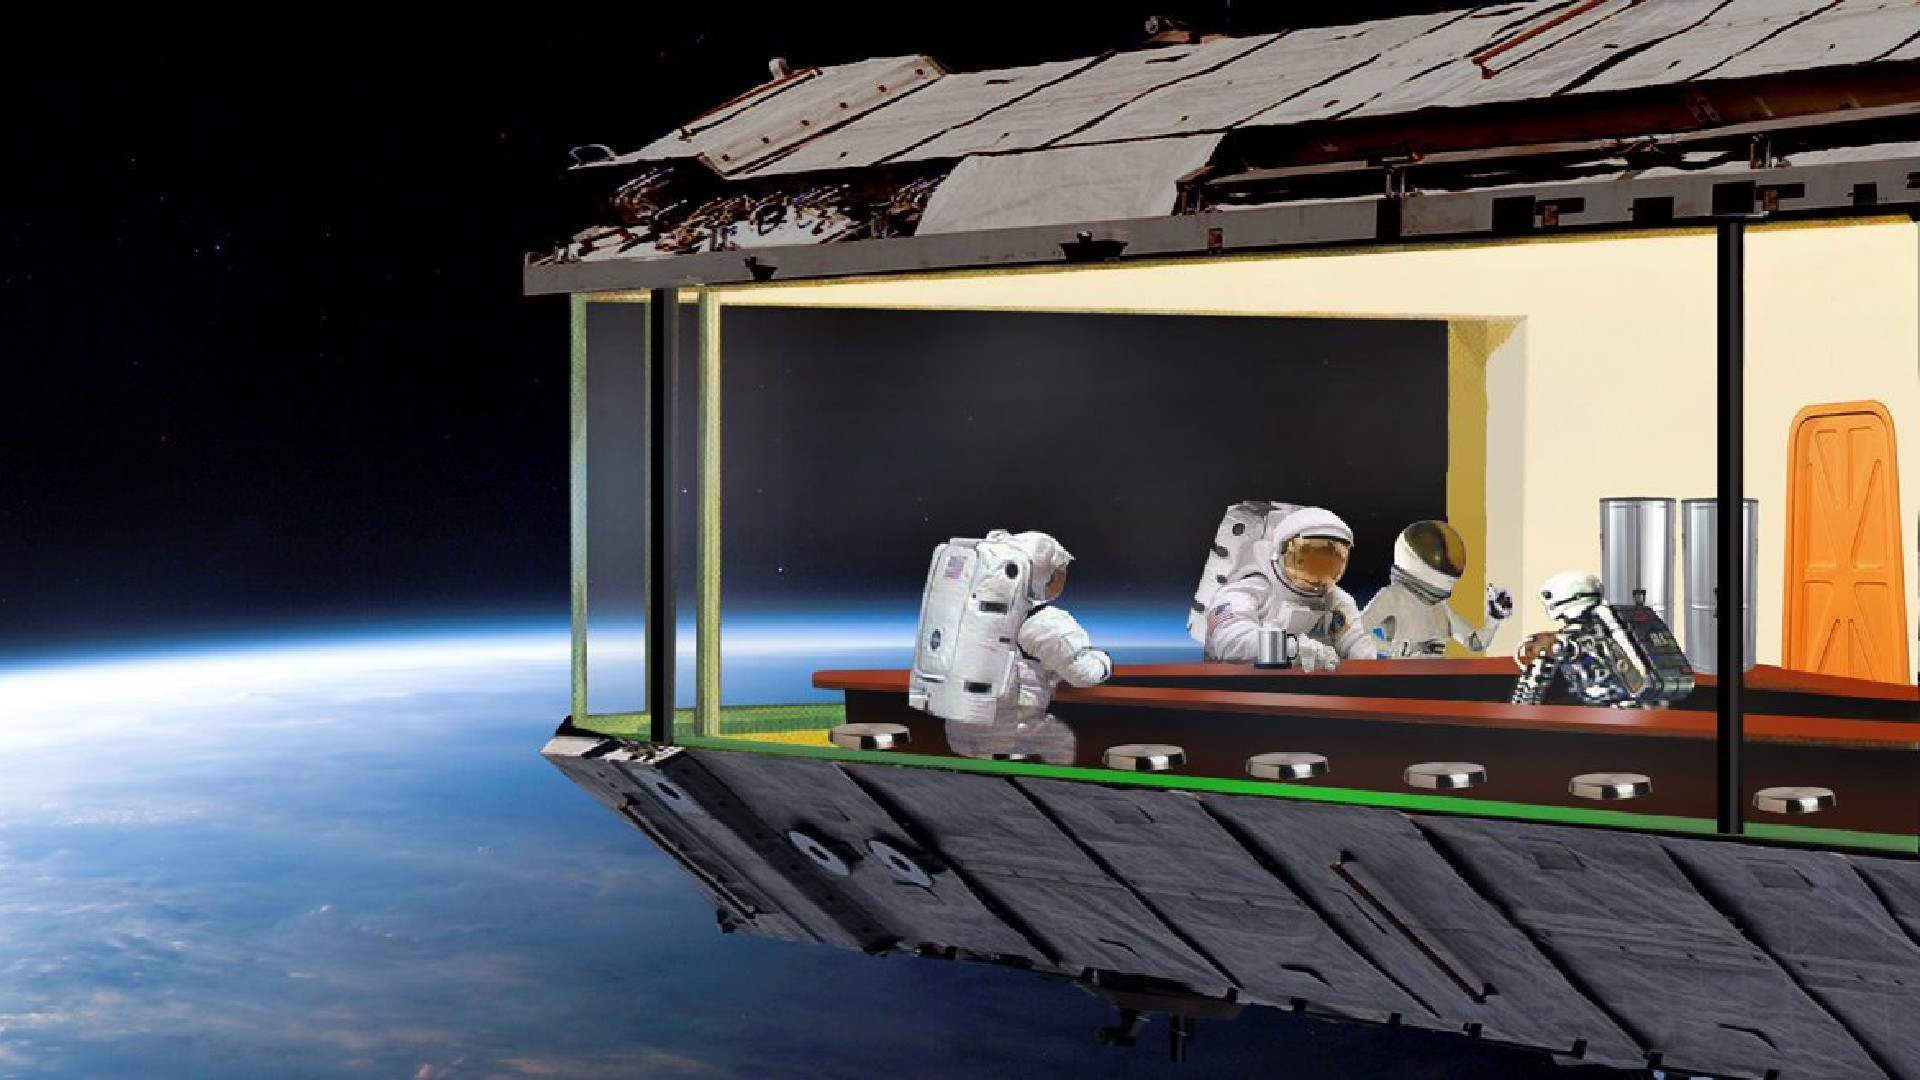 Sci-fi robot serving food in space-themed diner with astronaut customer - humorous wallpaper.